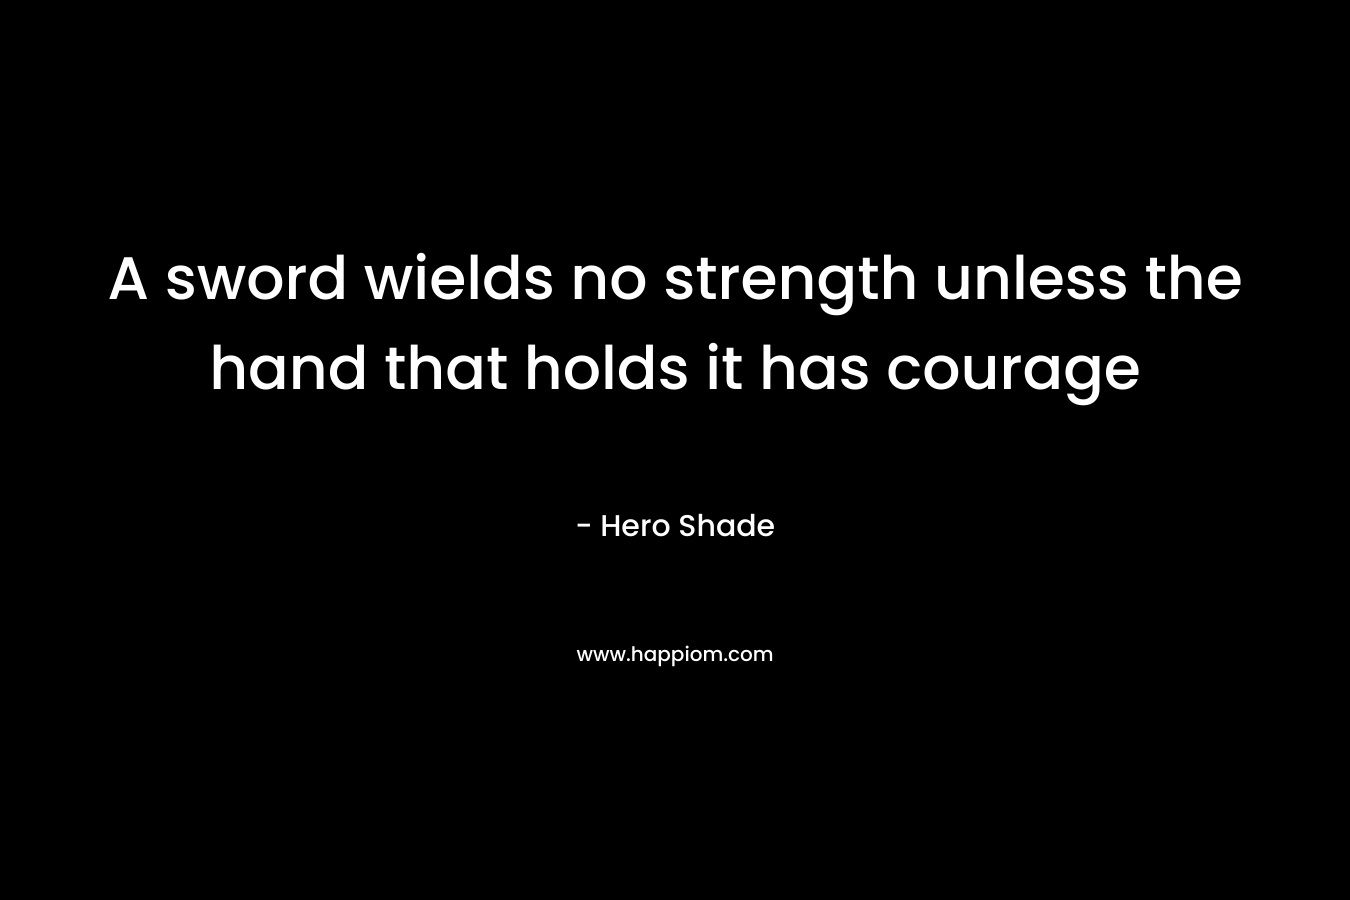 A sword wields no strength unless the hand that holds it has courage – Hero Shade